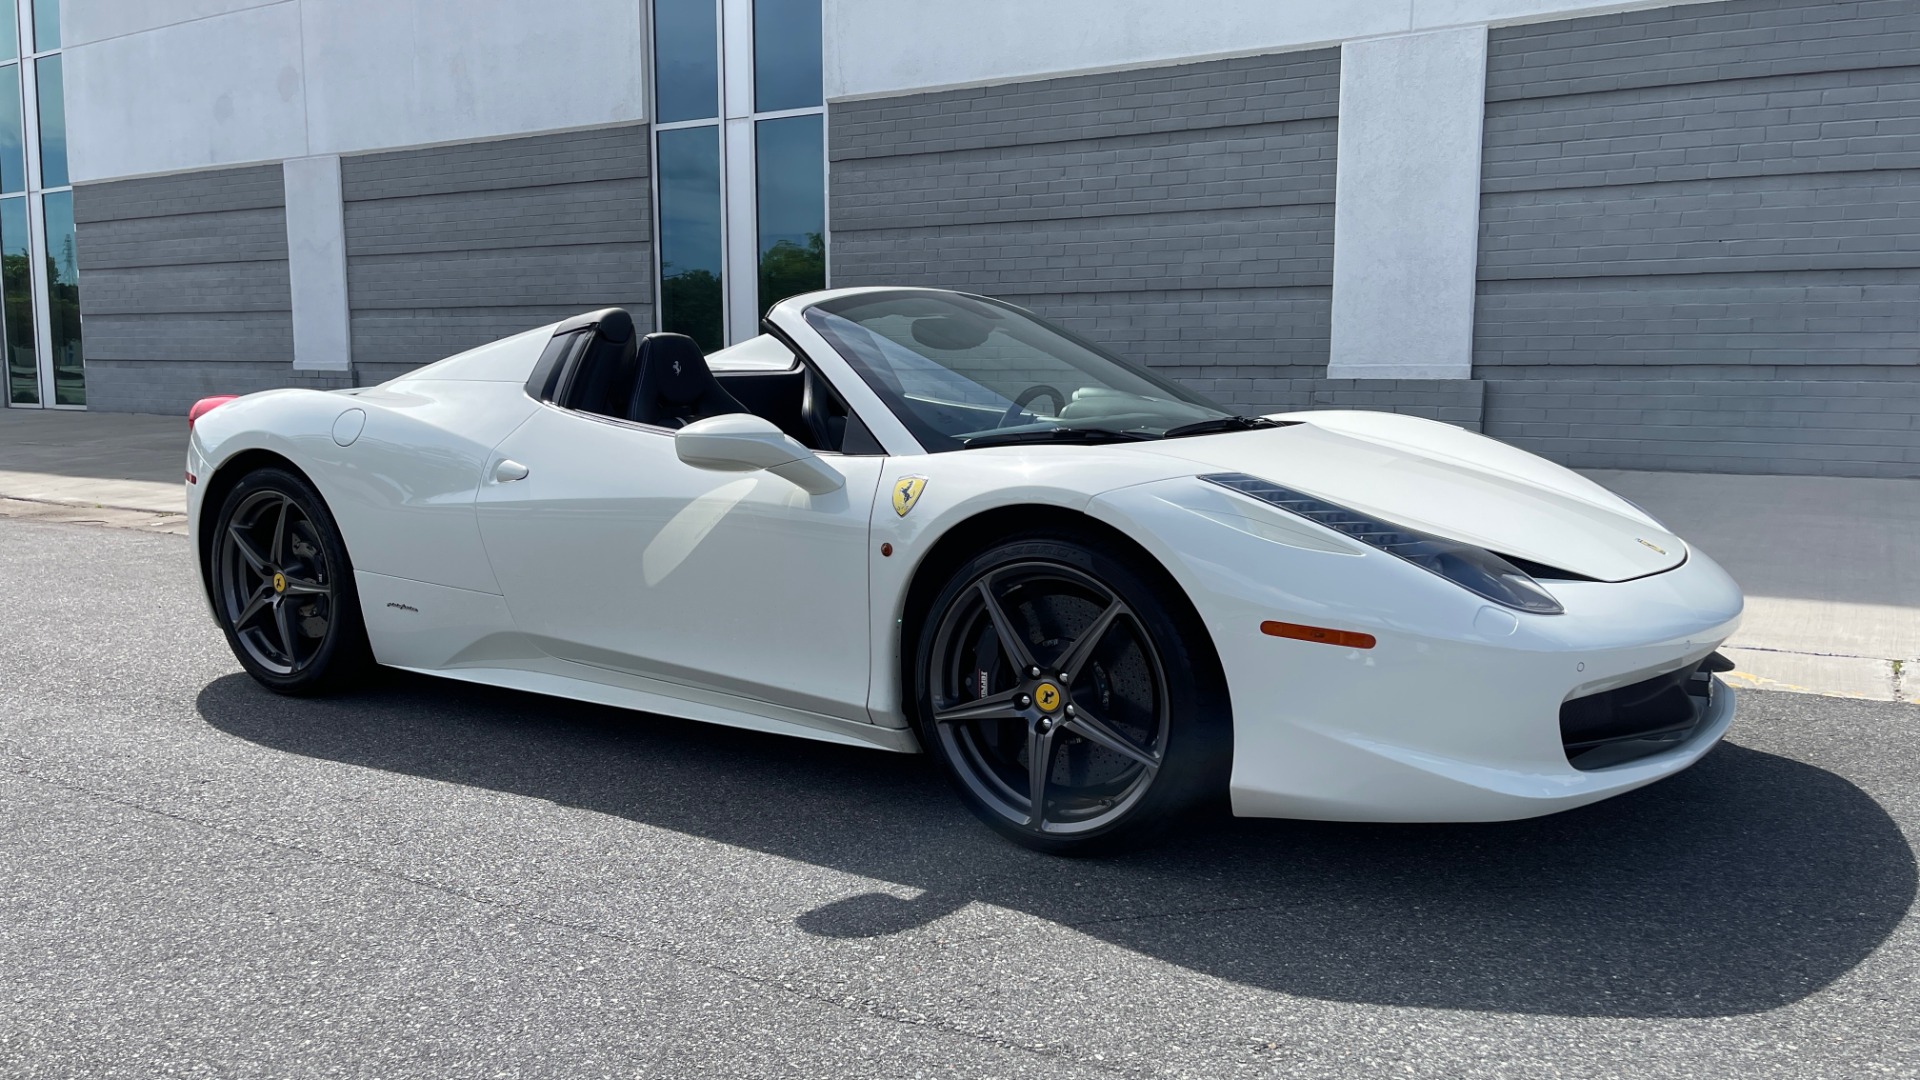 Used 2014 Ferrari 458 ITALIA SPIDER 570HP / F1 AUTO / CF SEATS / CARBON BRAKES / REARVIEW for sale Sold at Formula Imports in Charlotte NC 28227 13